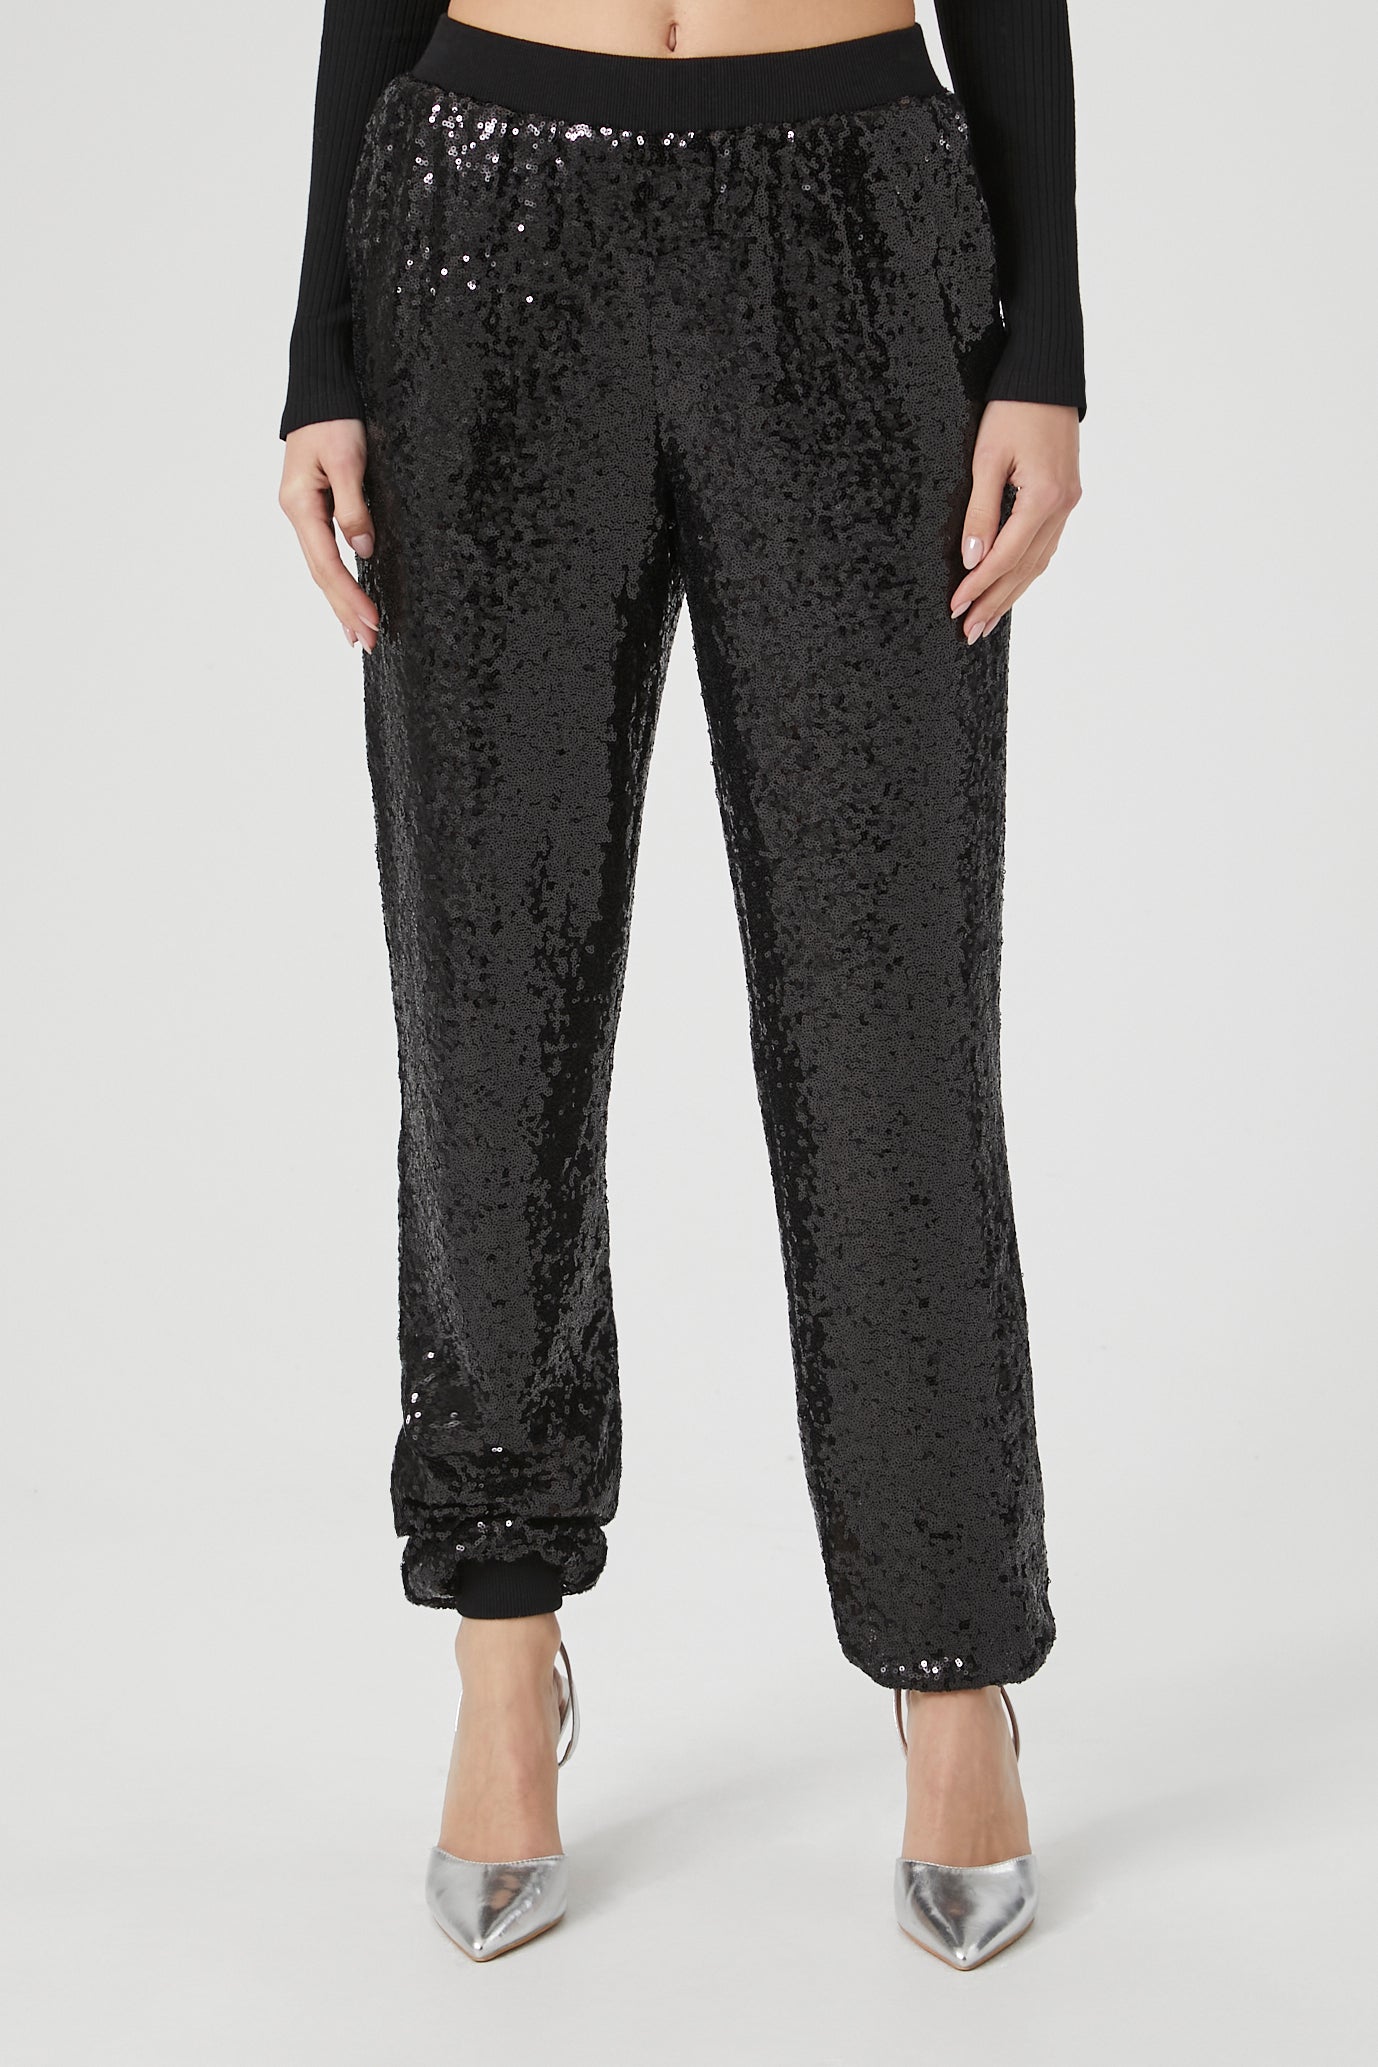 Sequin Mid Rise Jogger – Urban Planet